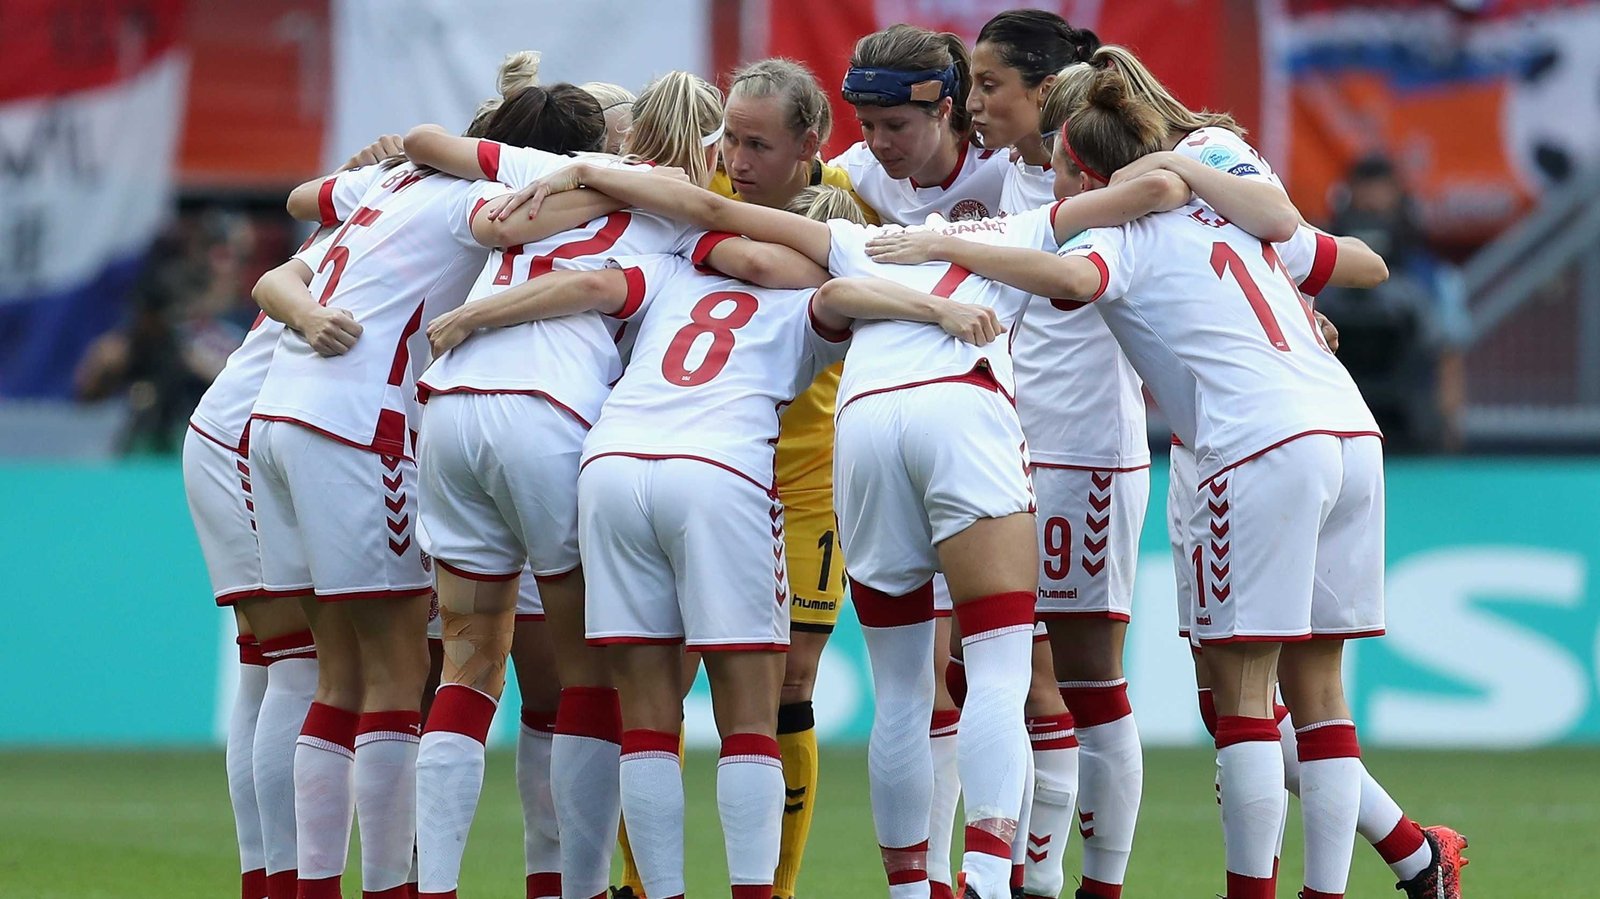 Danish Women's qualifier cancelled as pay row escalates